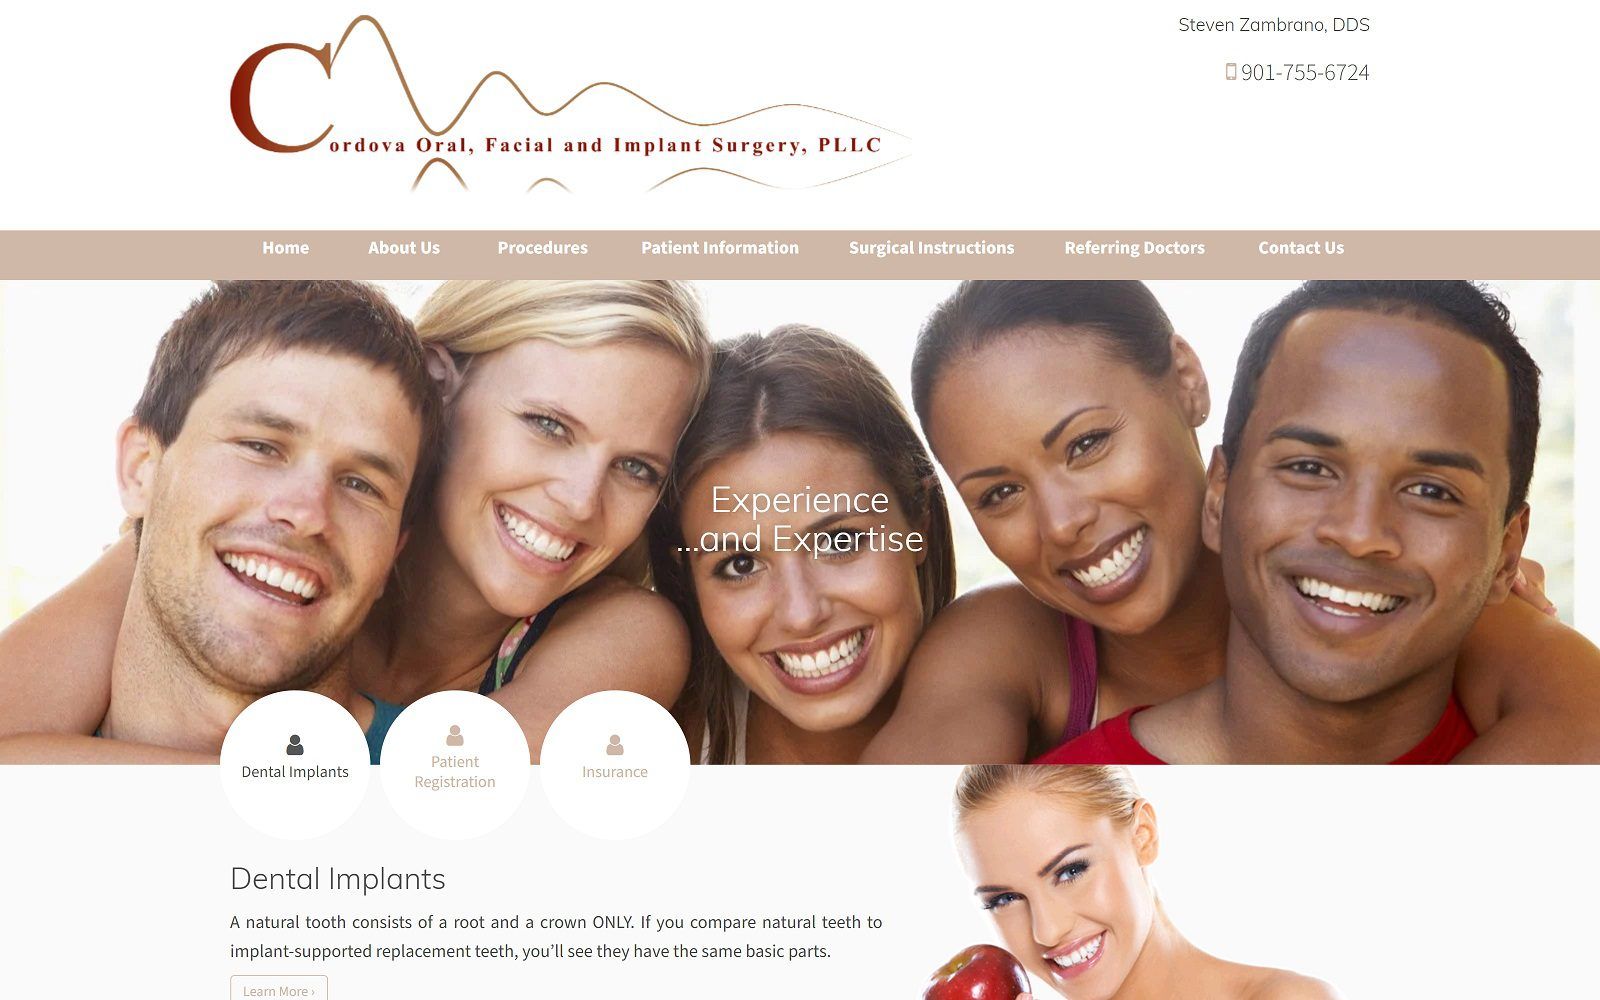 The screenshot of cordova oral, facial and implant surgery, pllc website